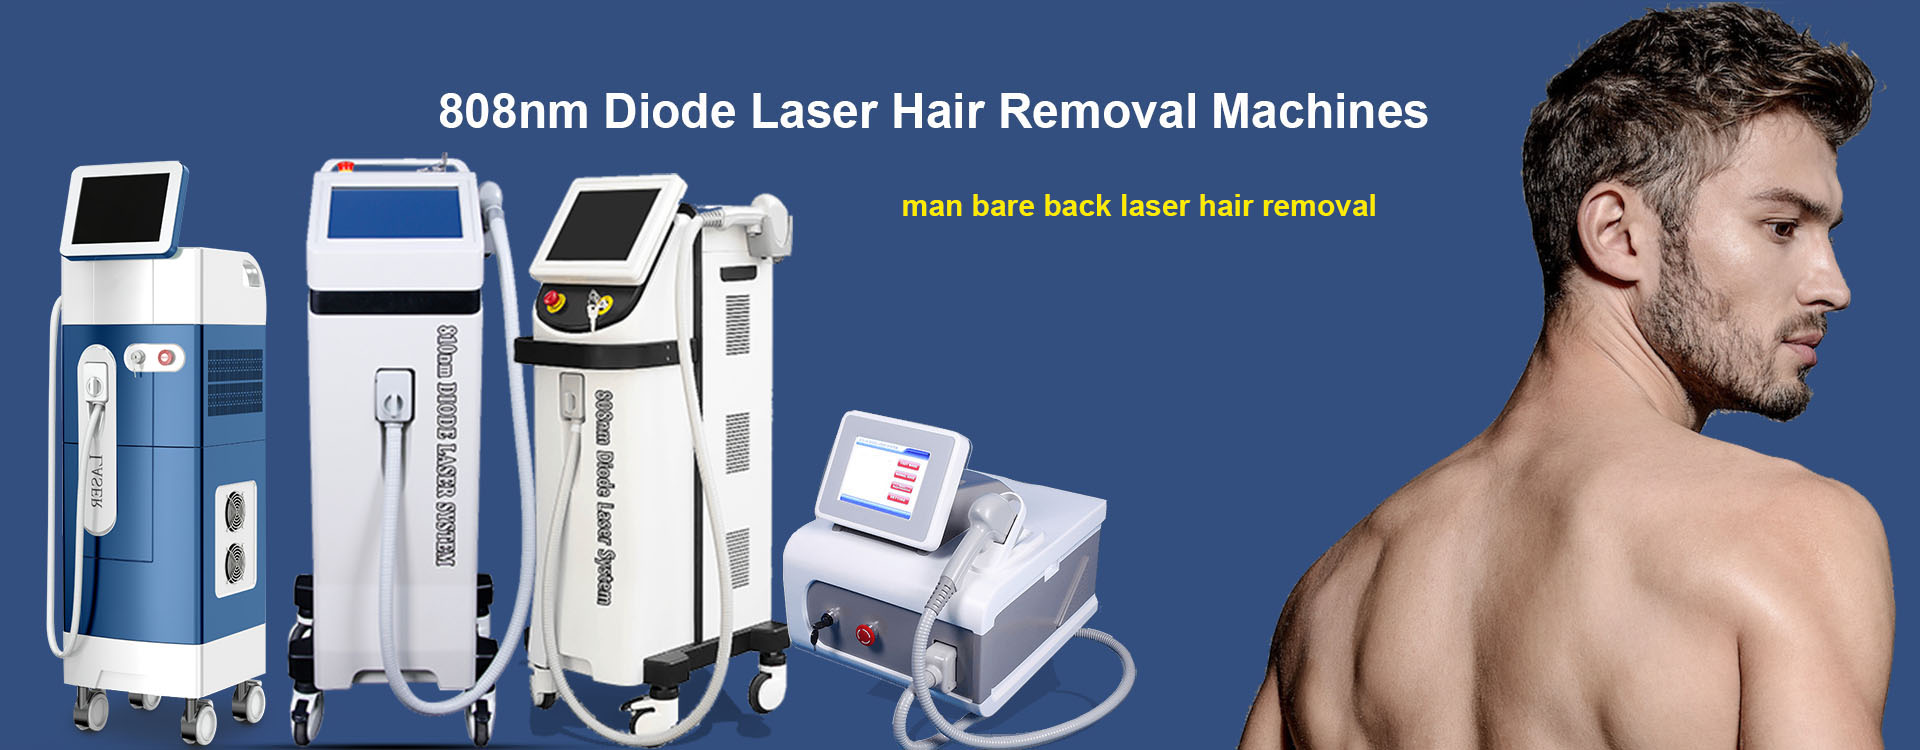 808nm Diode Laser Hair Removal Equipments For Sale - Supplier